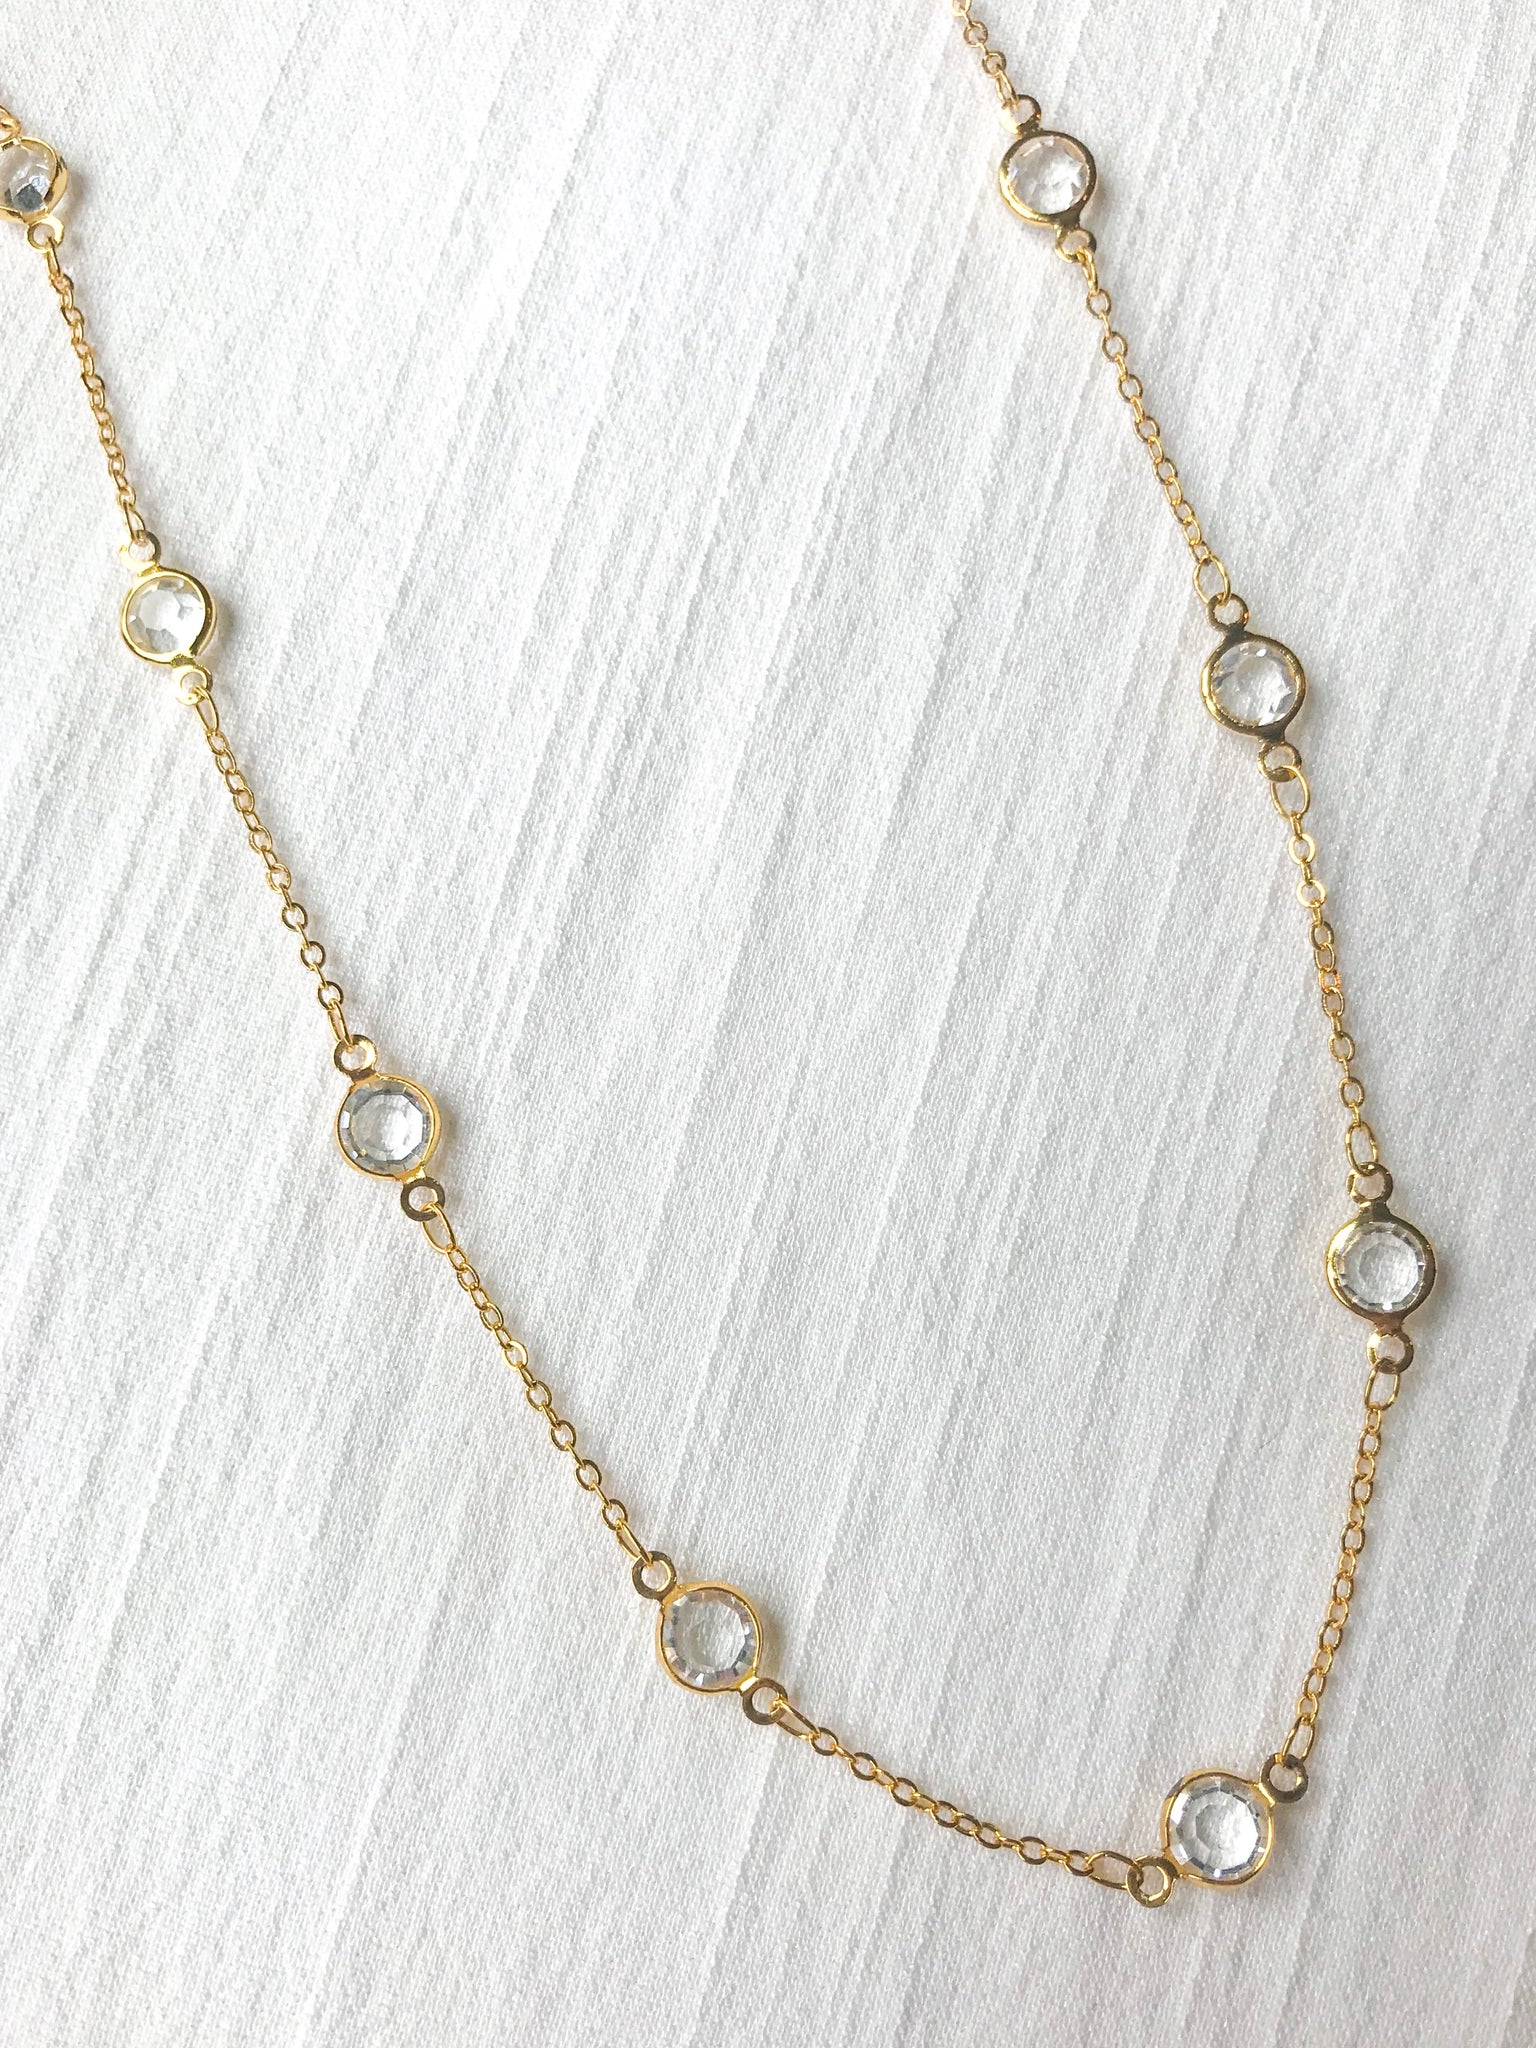 Diana Kate Necklace